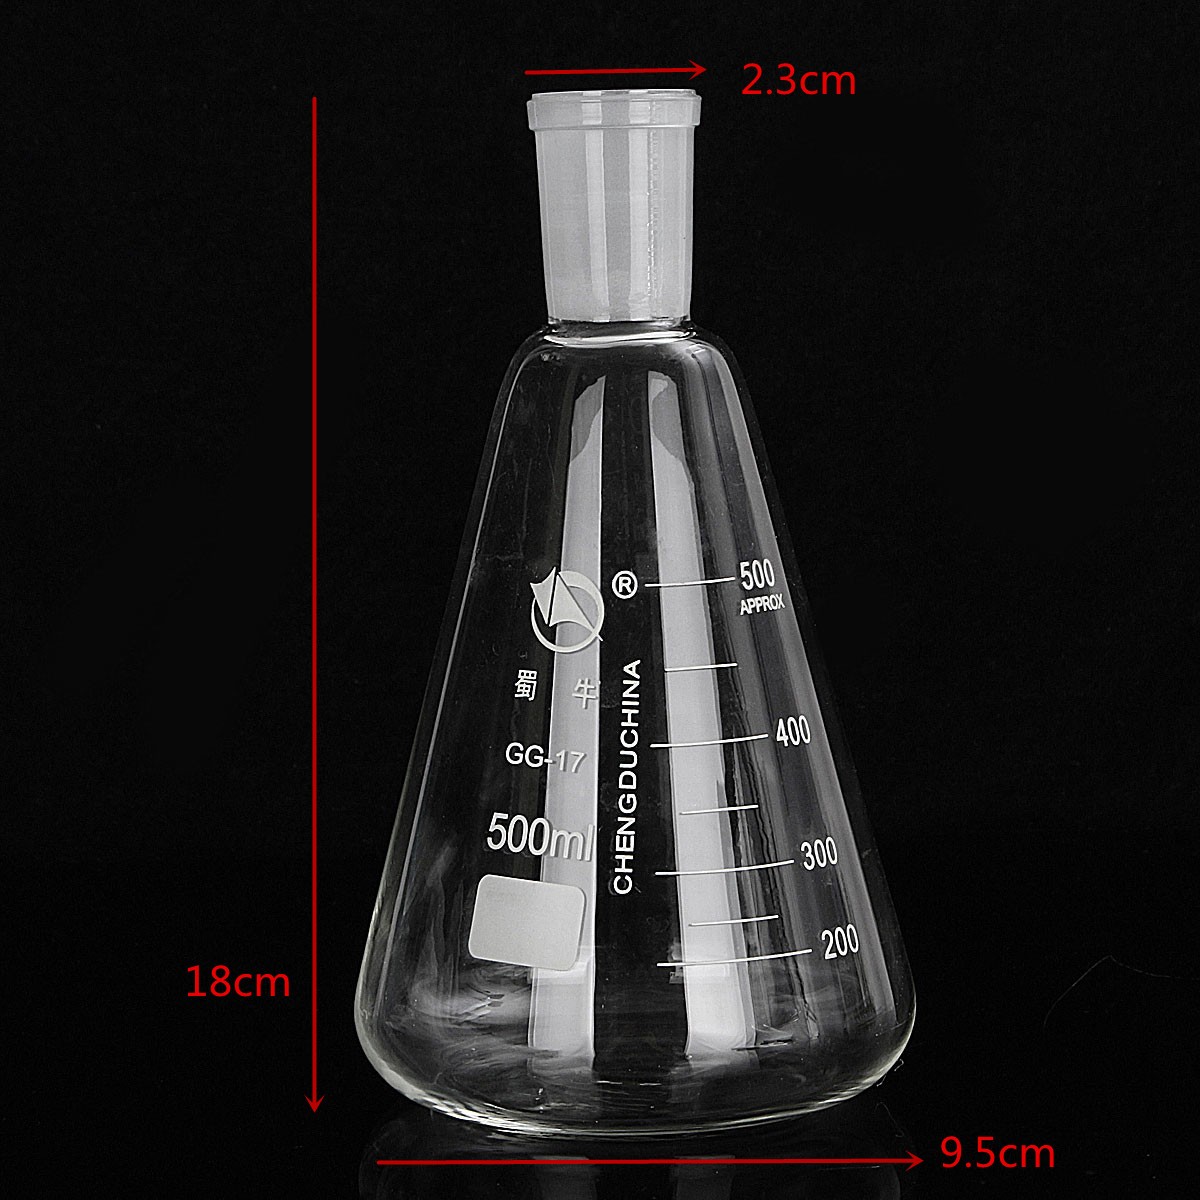 500mL-2429-Joint-Suction-Filtration-Equipment-Glass-Buchner-Funnel-Conical-Flask-Filter-Kit-1115186-6